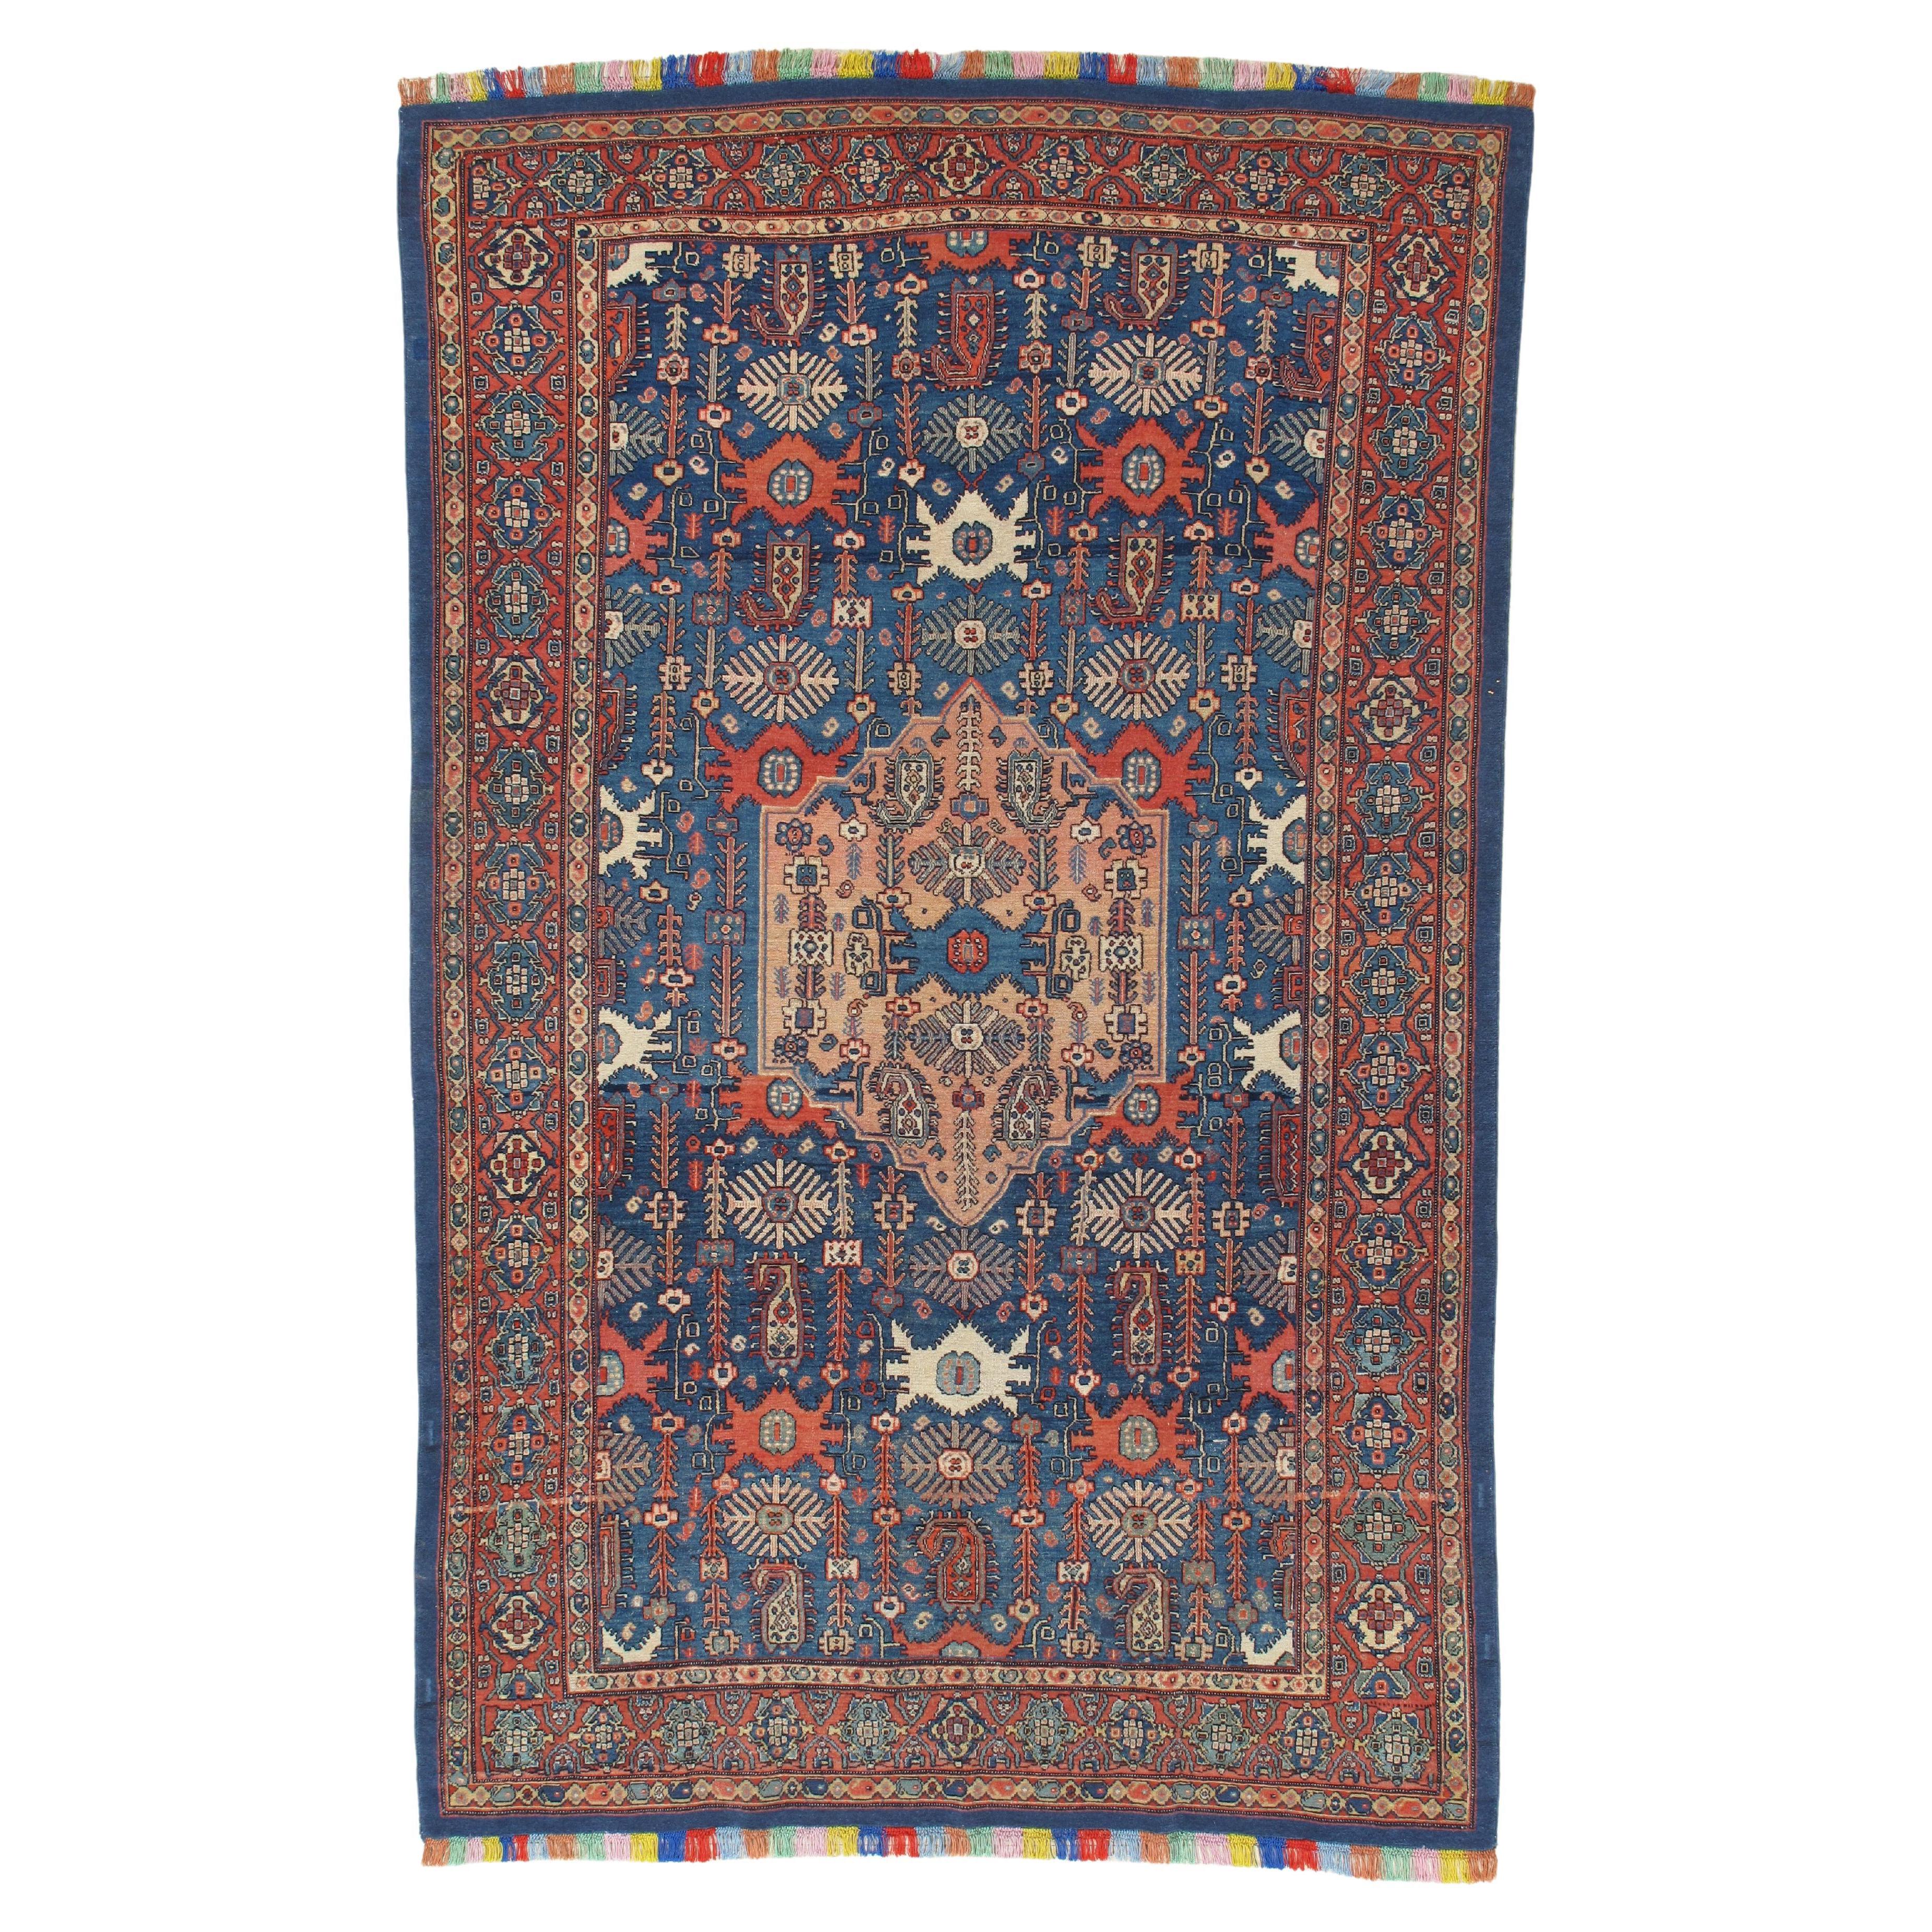 Antique Senneh Rug with Multicolored Silk Warp, Handmade, Ivory, Red, Light Blue